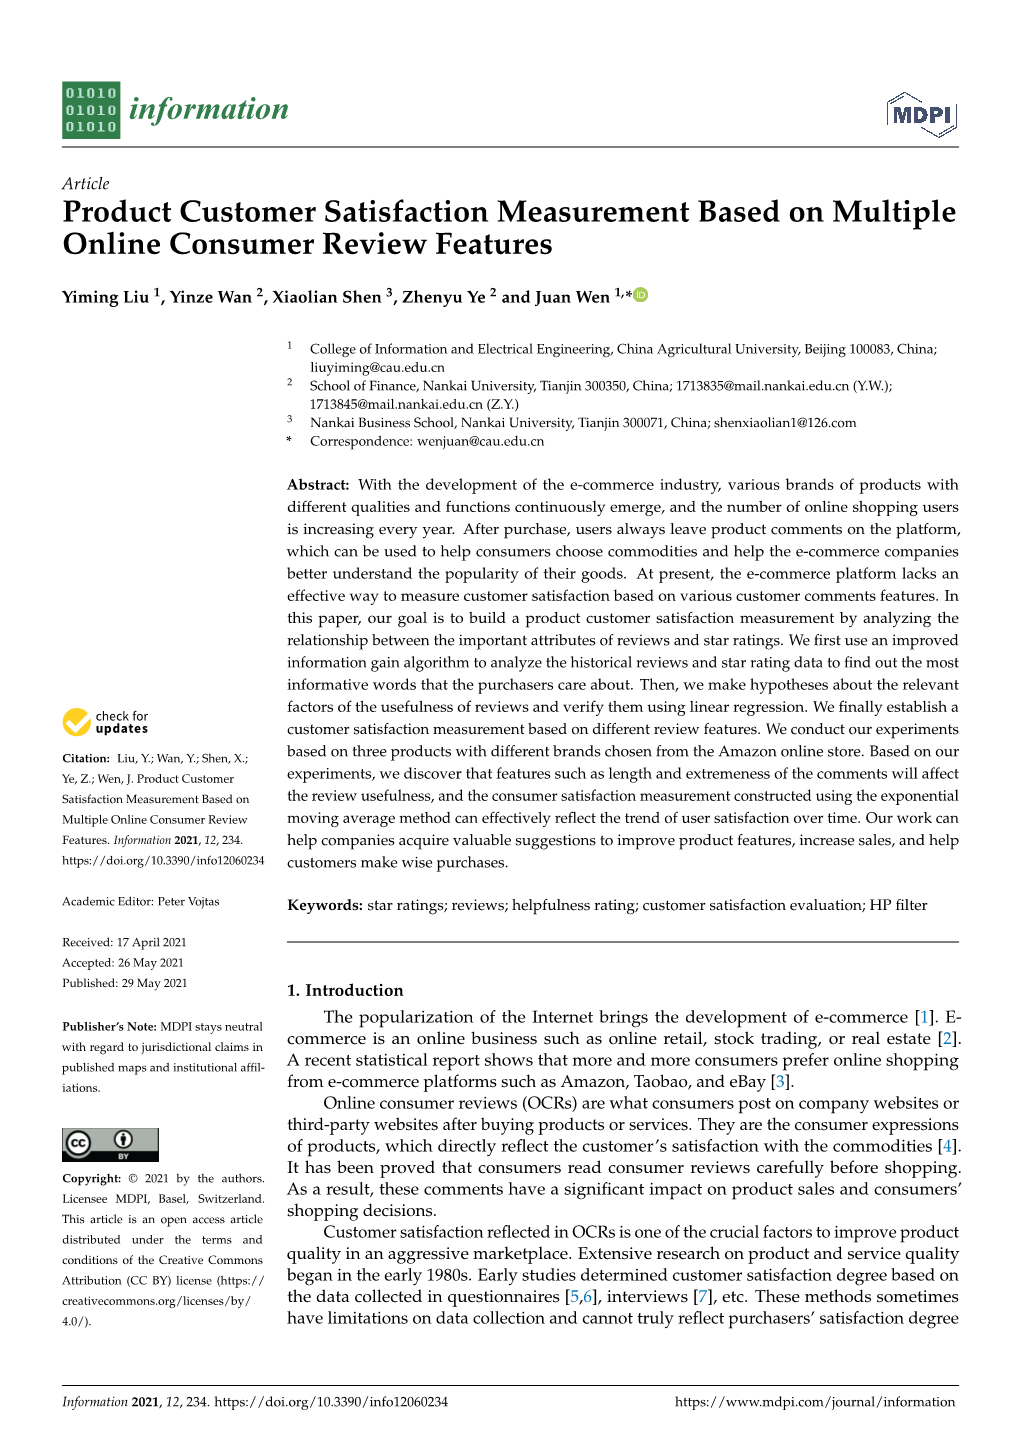 Product Customer Satisfaction Measurement Based on Multiple Online Consumer Review Features